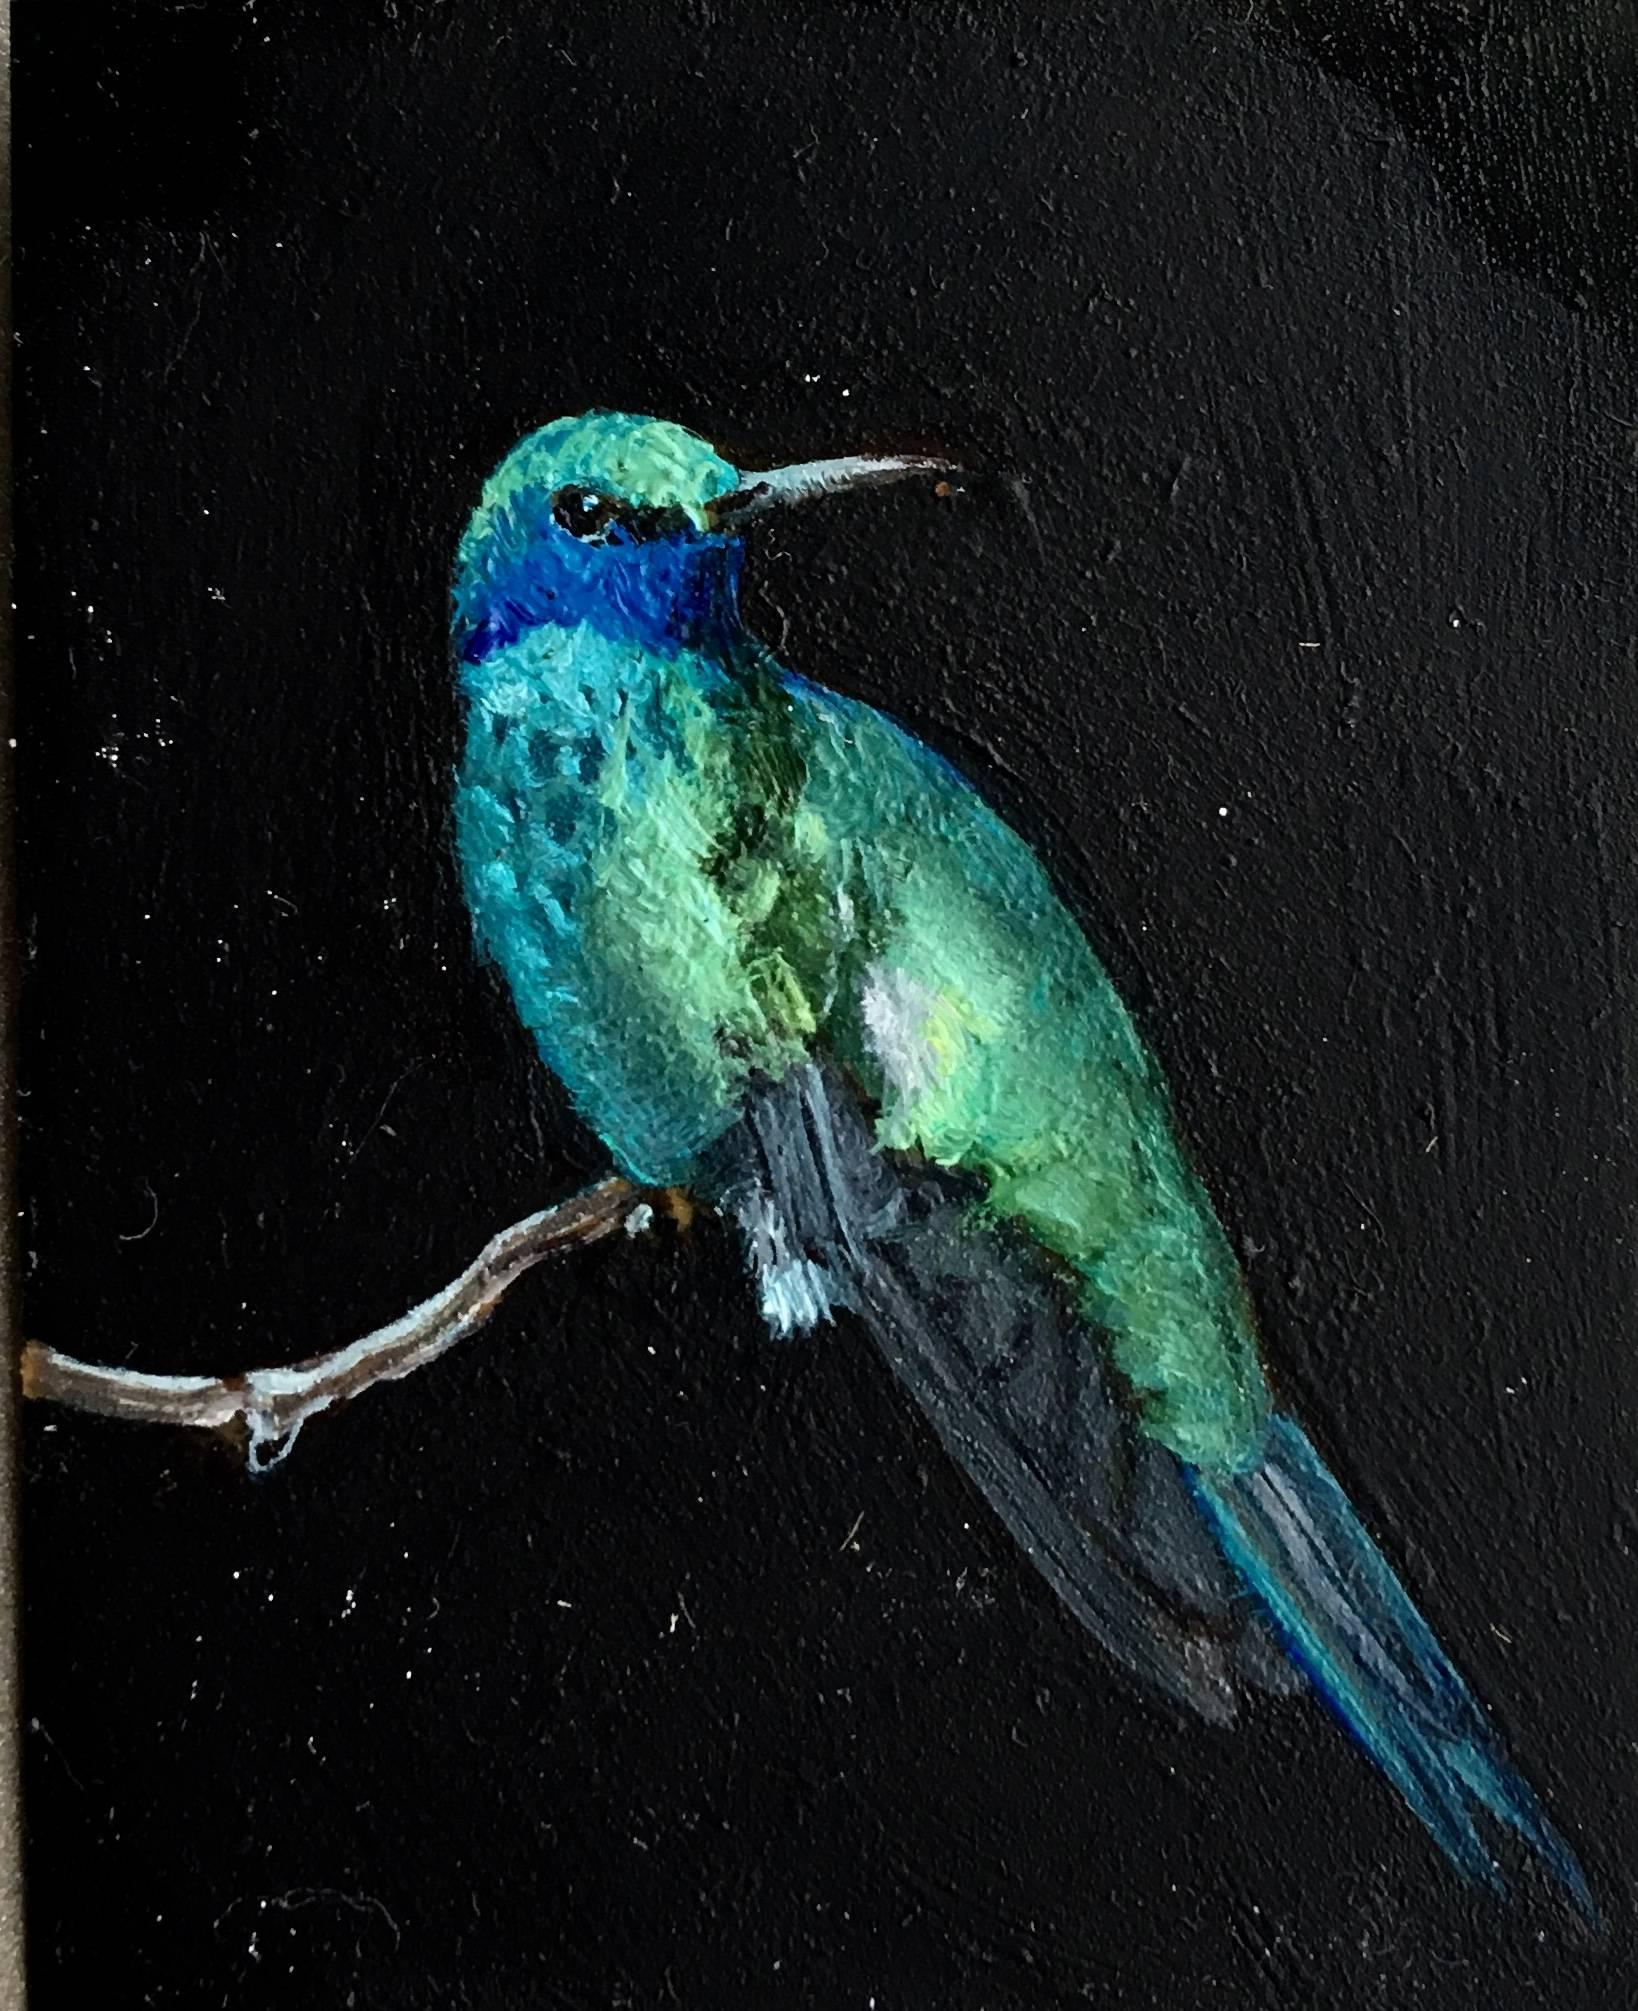 Dina Brodsky's realist oil on mylar animal miniature, "Blue Hummingbird," 2018, depicts a tiny blue hummingbird perched on a small branch. The bird's brilliantly saturated turquoise, royal blue, and emerald feathers are highlighted by the its black